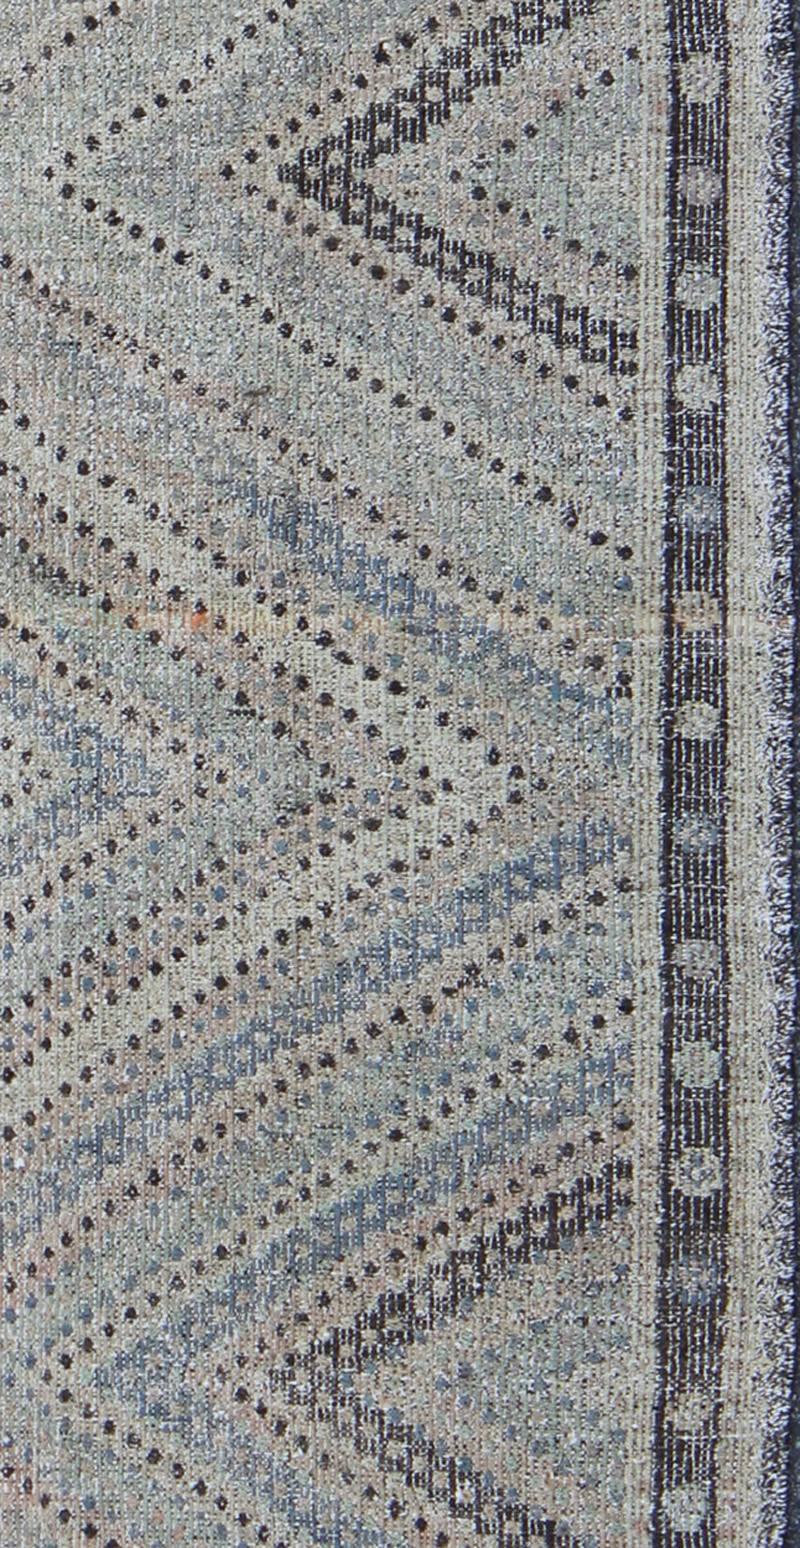 Hand-Woven Embroidered Kilim in Light Blue, Gray, Light Teal, Brown & Pastel Colors  